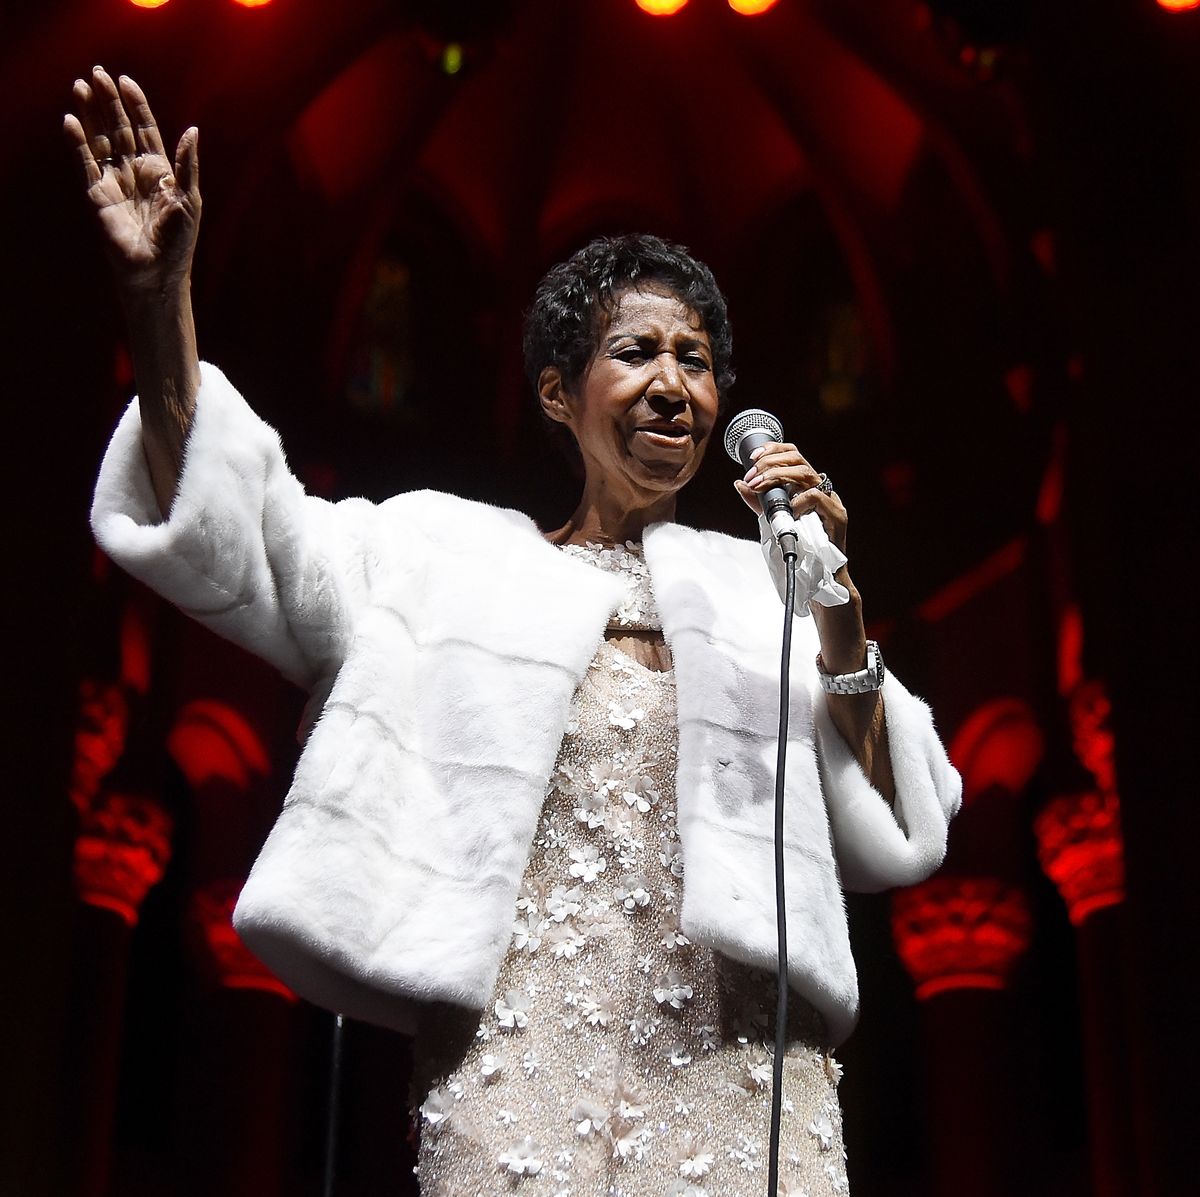 Aretha Franklin Dead at 76 - How Aretha's Powerful Voice Changed History